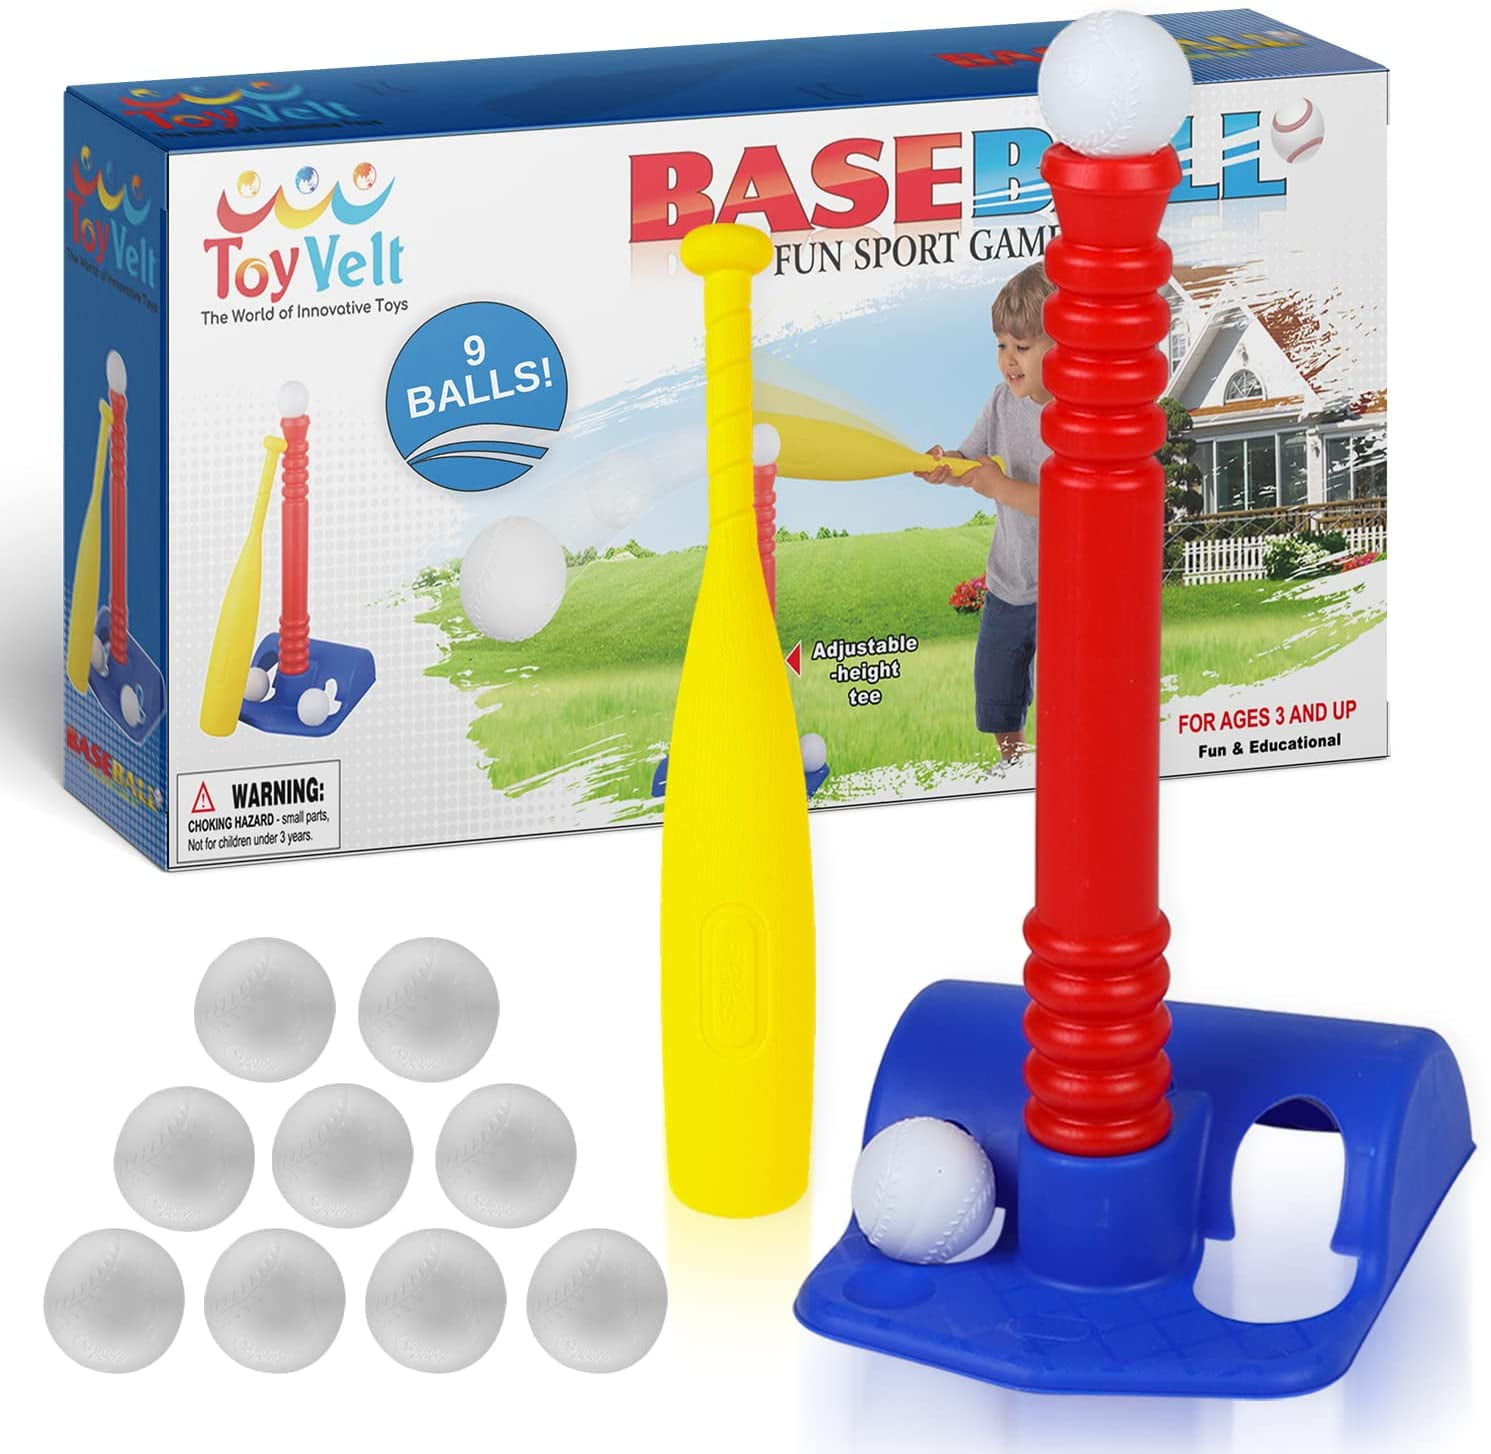 Best Baseball T Ball Toys for Kids Age 1 Years Old Aoneky Mini Foam Tball Set for Toddlers Carry Bag Included 